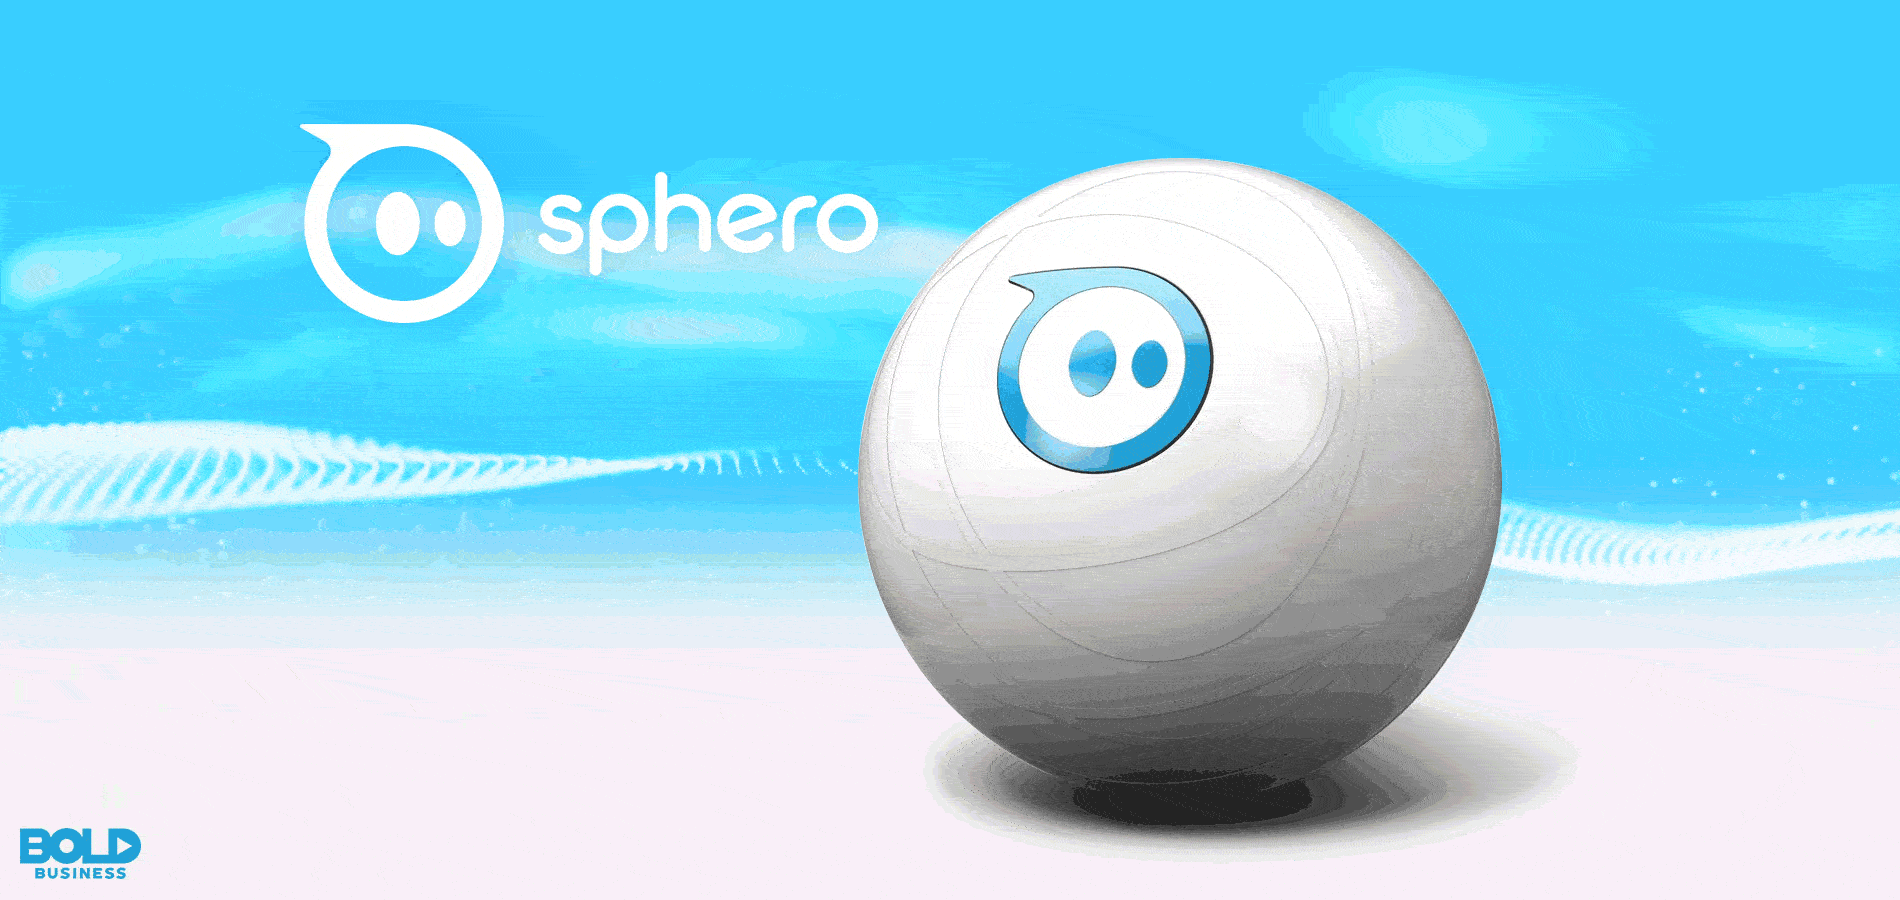 Sphero Gets $12M to Focus on Intersection of Play and Learning